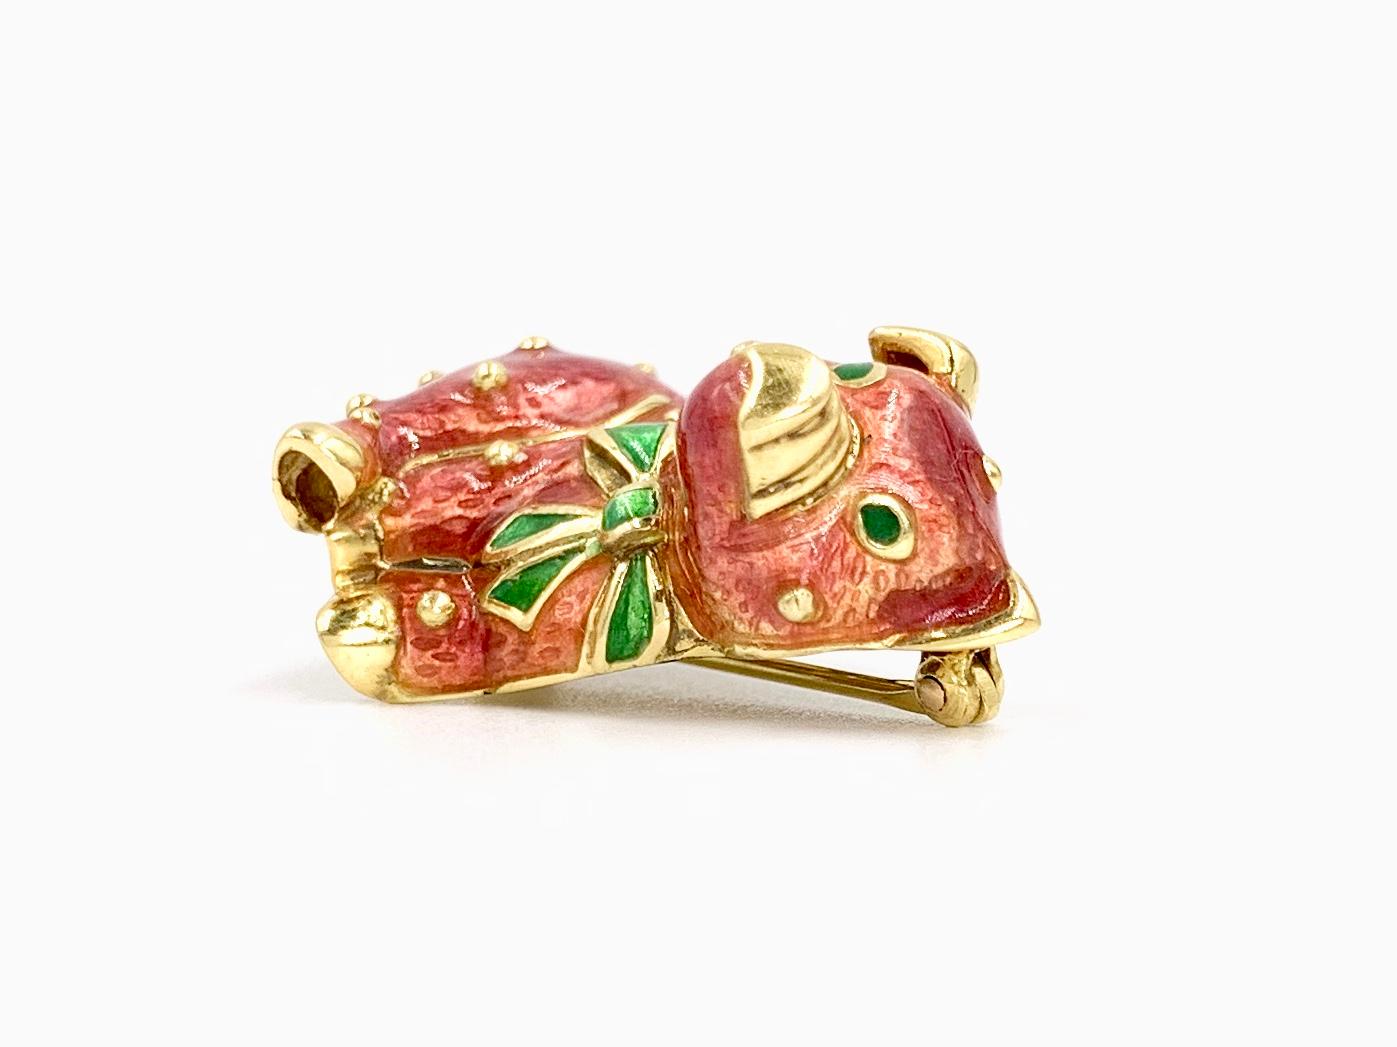 Adorable 18 karat yellow gold and hand painted enamel pig brooch by Hidalgo. This charming pink enamel pig dons a green bow around the neck with the signature Hidalgo yellow gold beading throughout the piece. Enamel is in near pristine